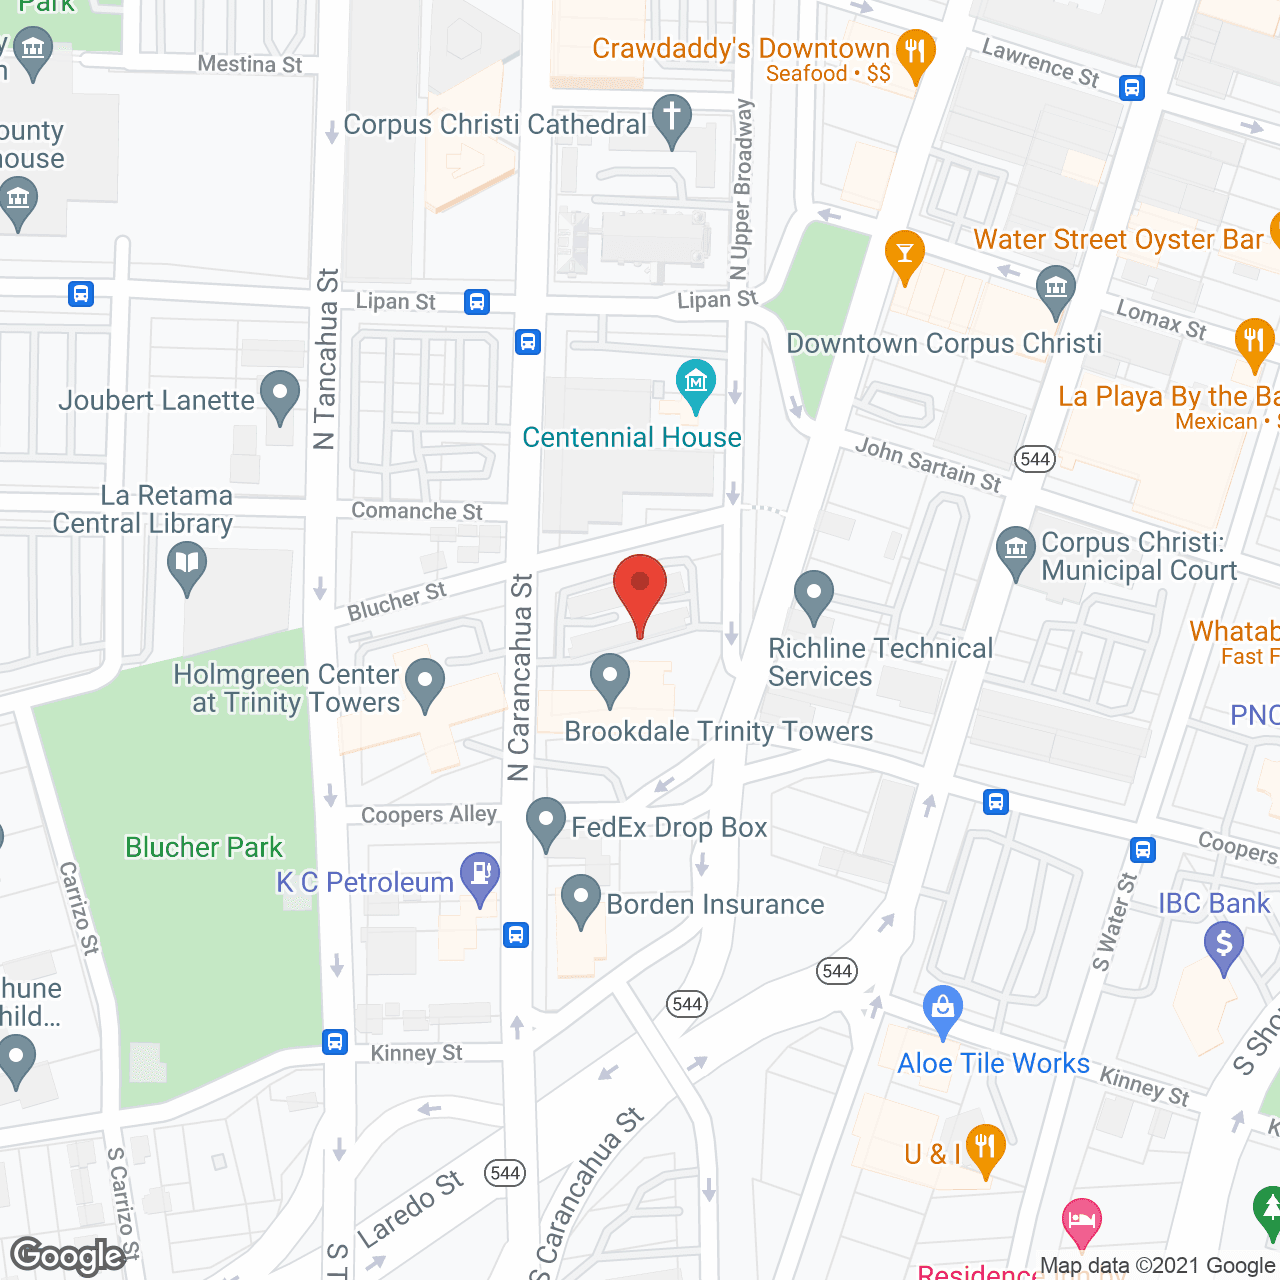 Brookdale Trinity Towers in google map